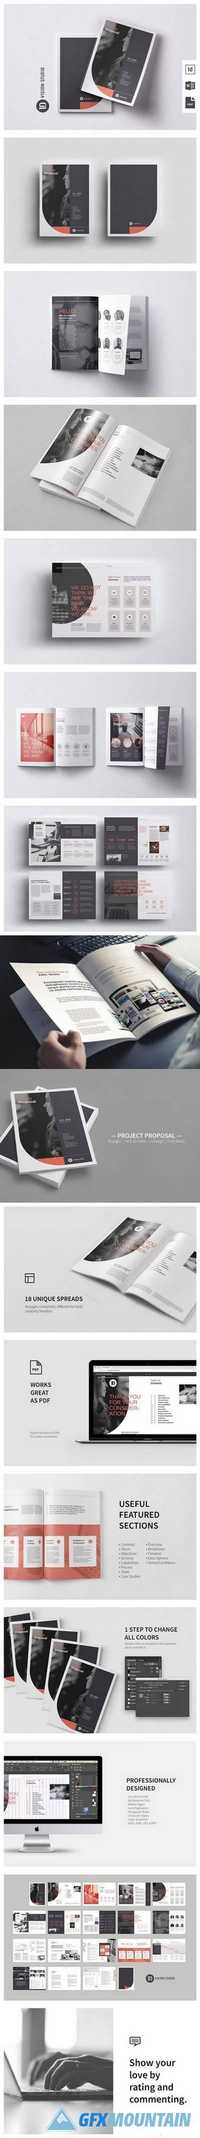 Project Proposal Template 006 1654217